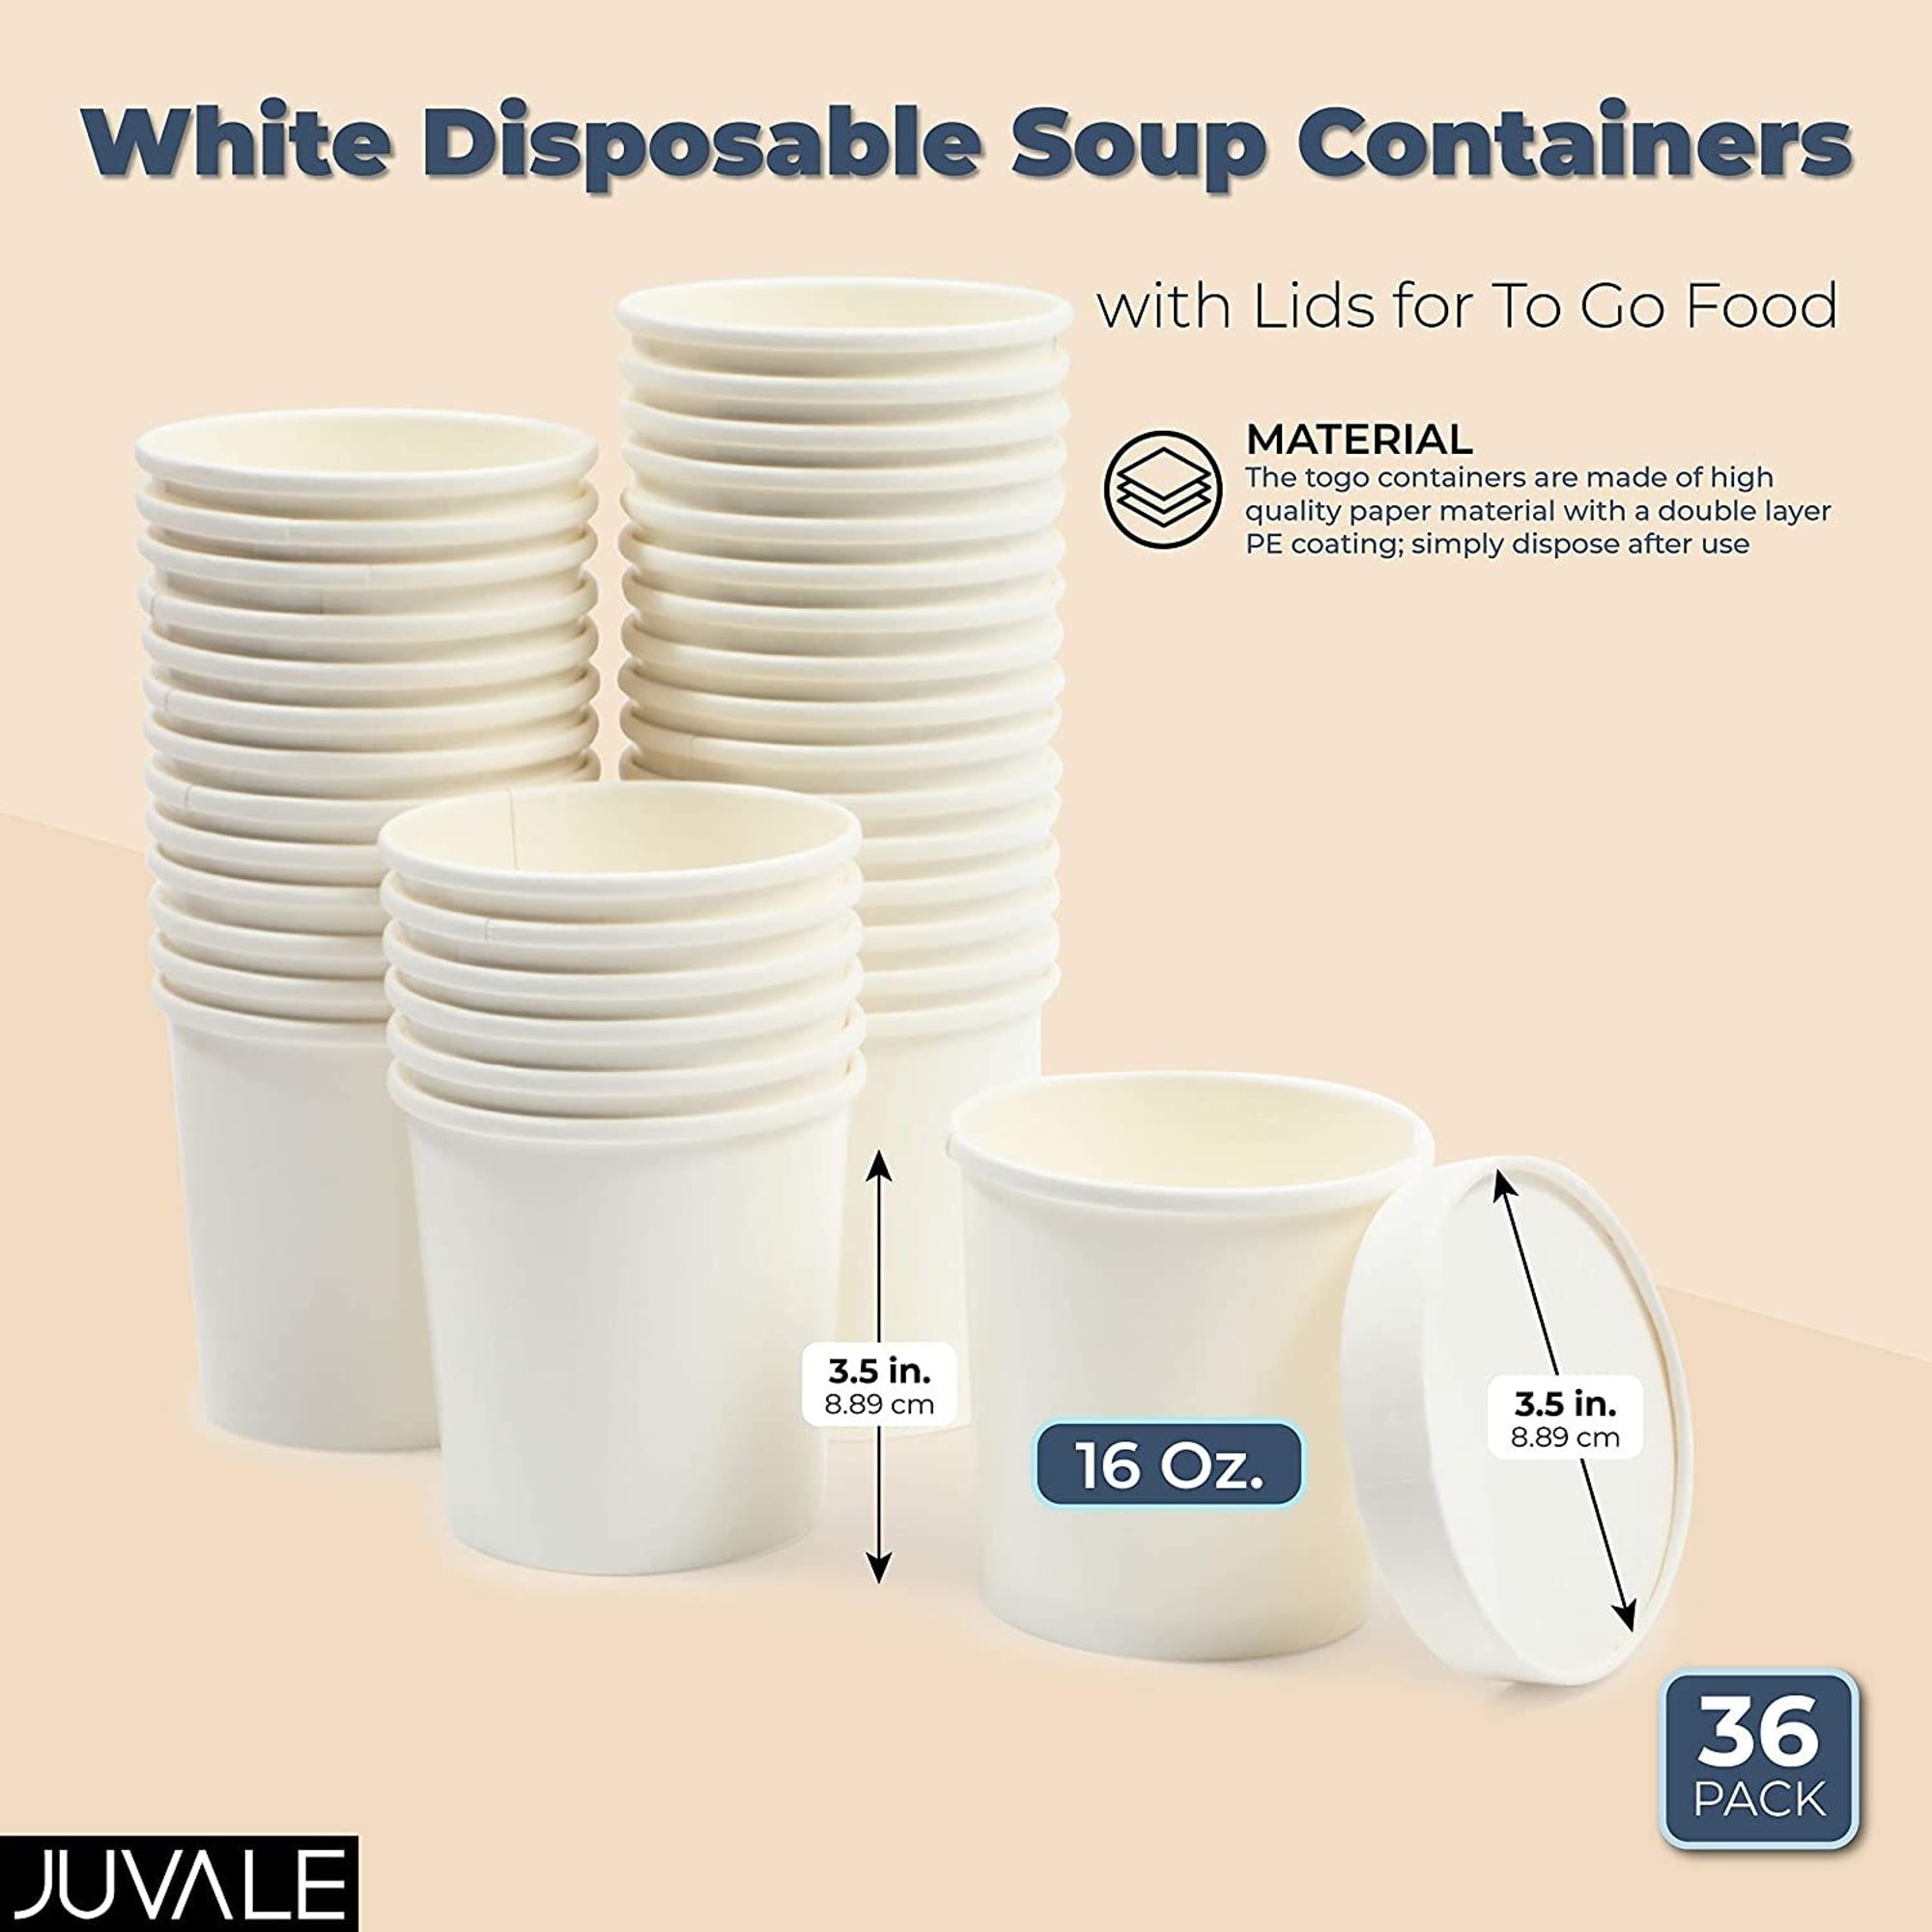 https://ak1.ostkcdn.com/images/products/is/images/direct/24e8088481e6c3f298142c75e033e4f85cf2eb95/White-Disposable-Soup-Containers-with-Lids-for-To-Go-Food-%2816-oz%2C-36-Pack%29.jpg